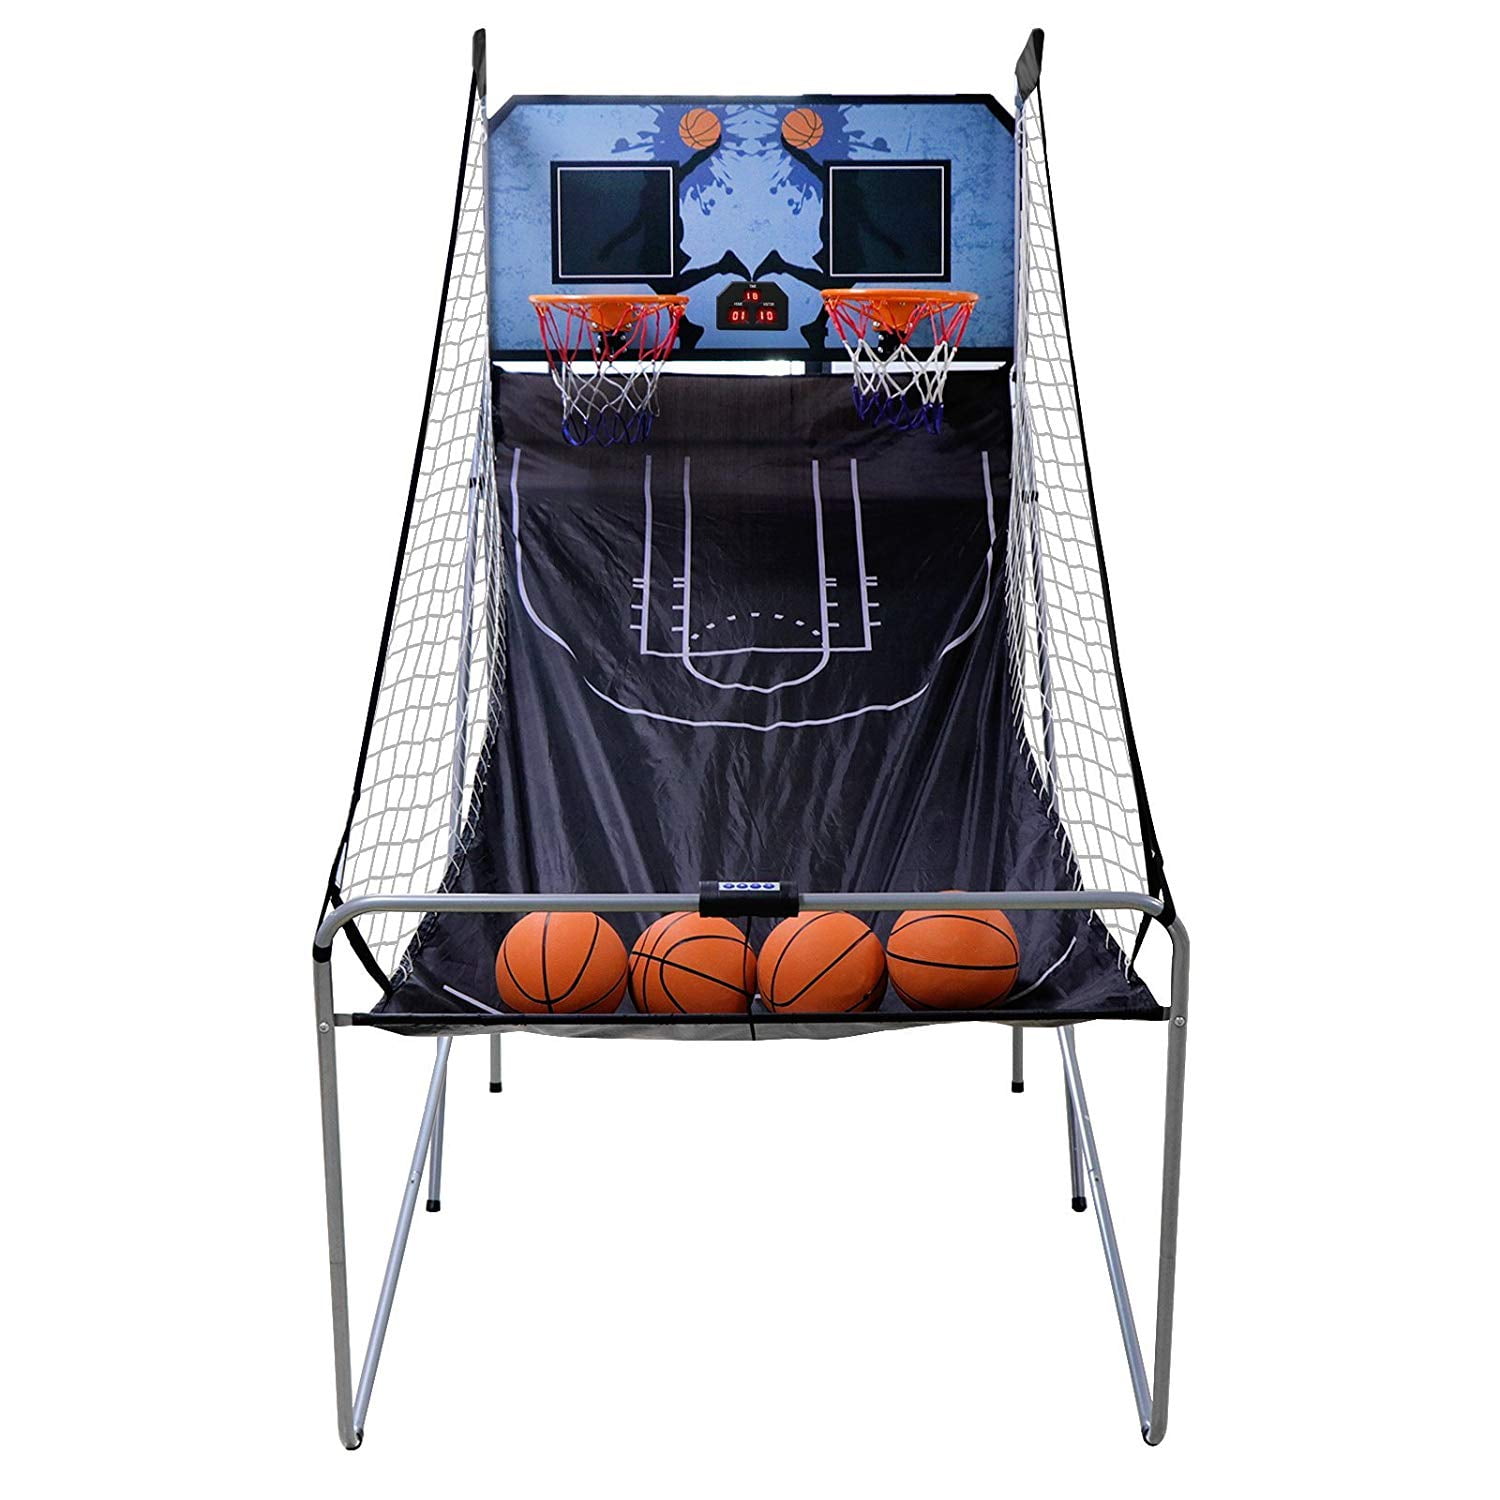 VIVOHOME Foldable Dual Shot Basketball Arcade Game Electronic for 2 Players with 8 Game Modes with Pitchback Baseball Rebounder Green 